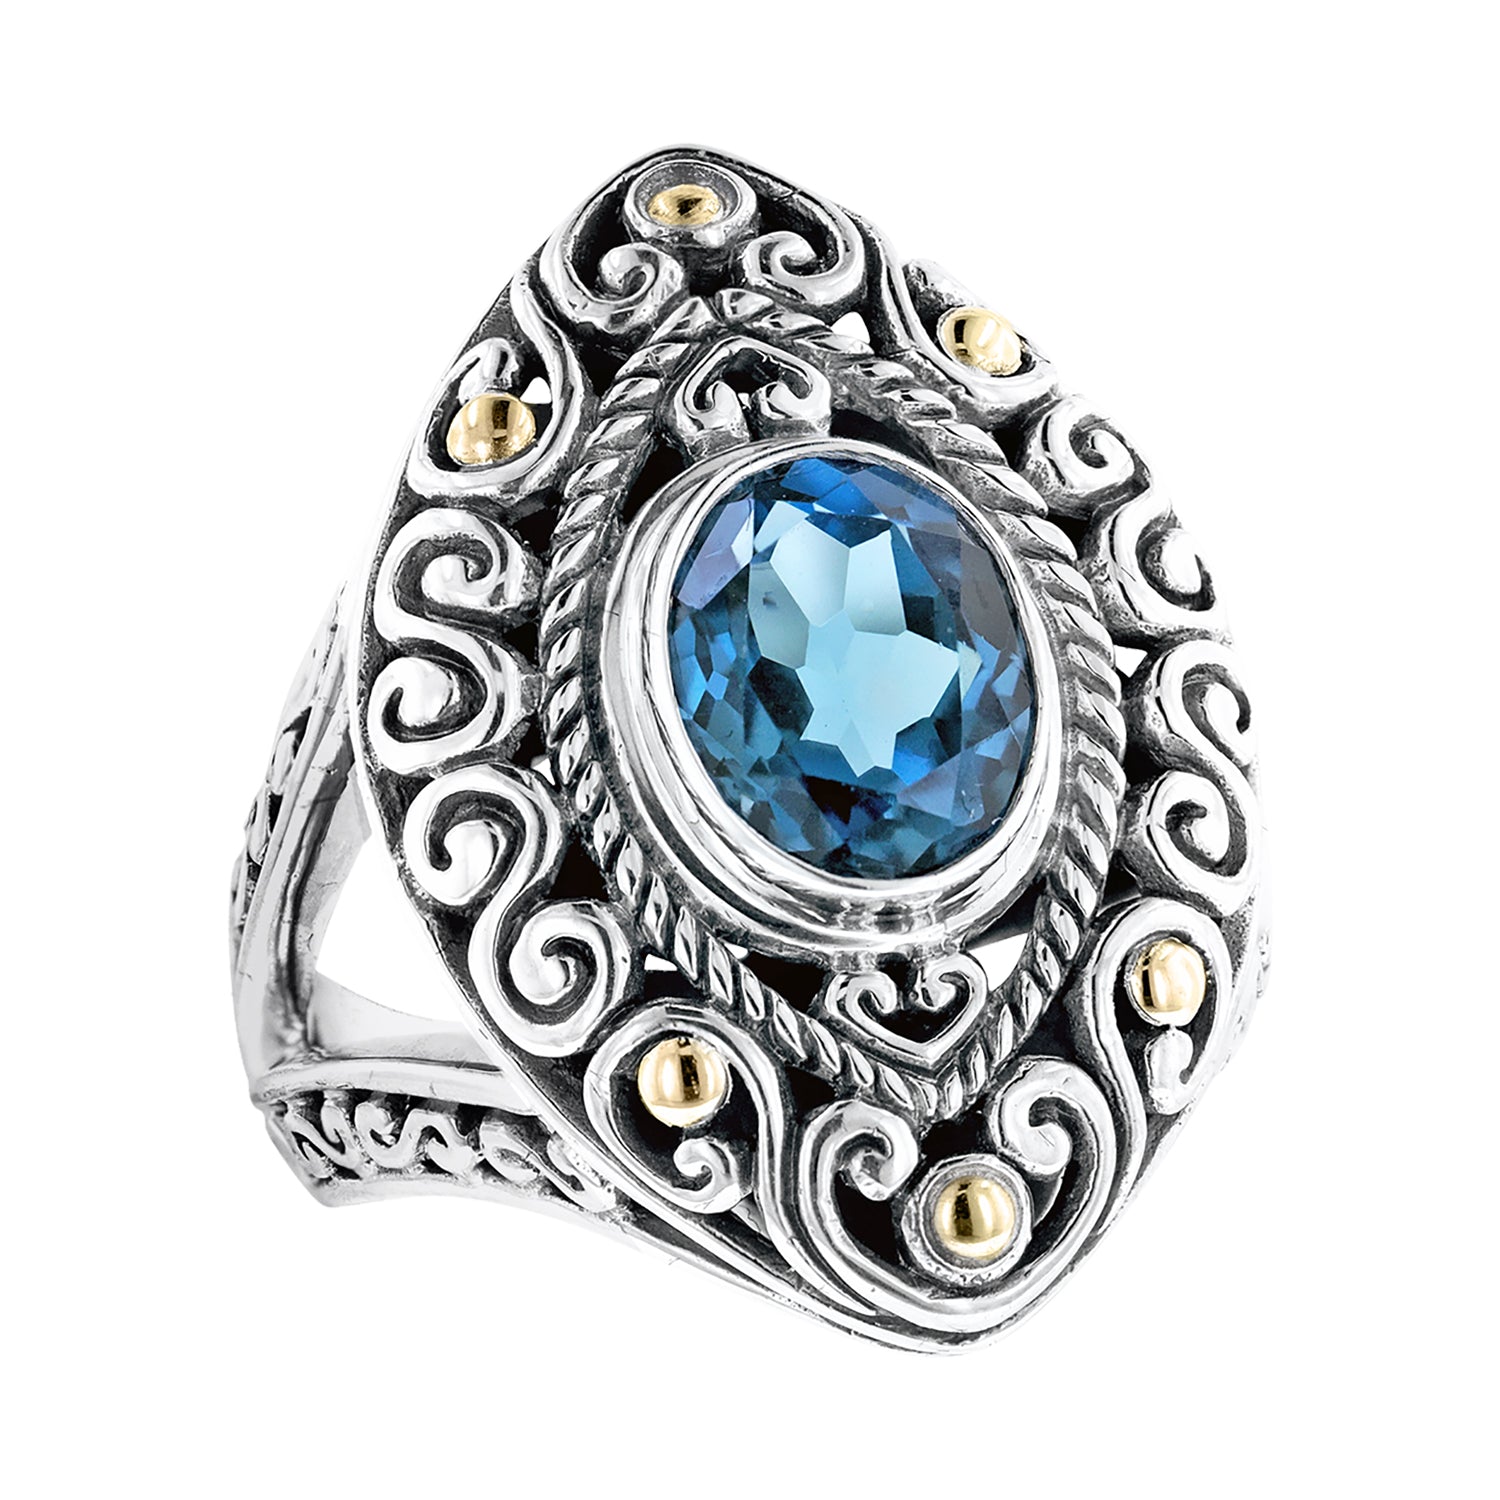 Sterling Silver London Blue Topaz Balinese Scrollwork Ring with 18K Gold Accents